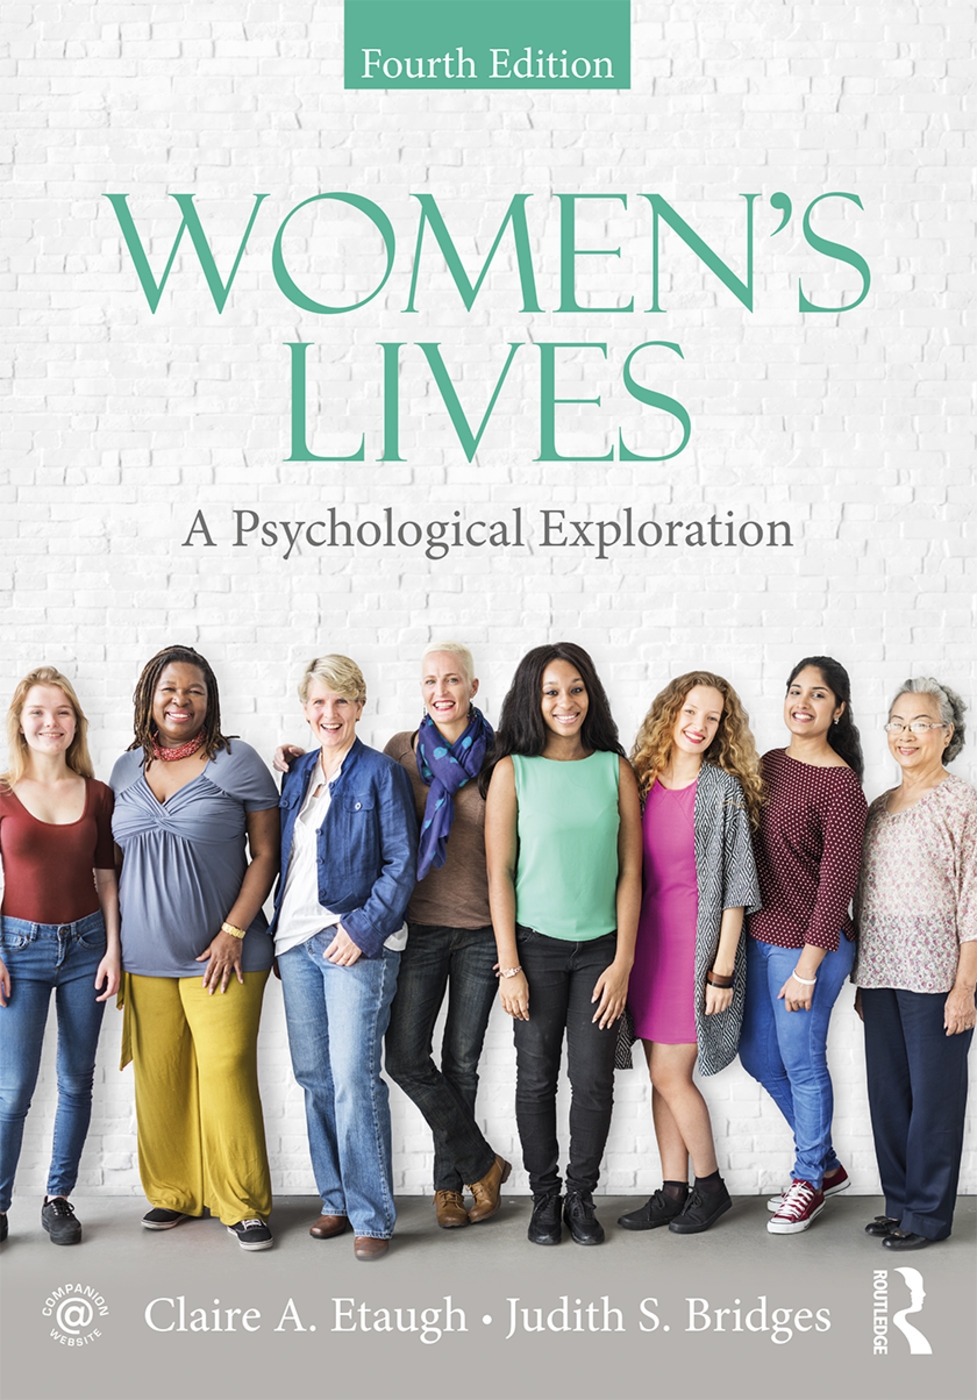 Women’s Lives: A Psychological Exploration, Fourth Edition